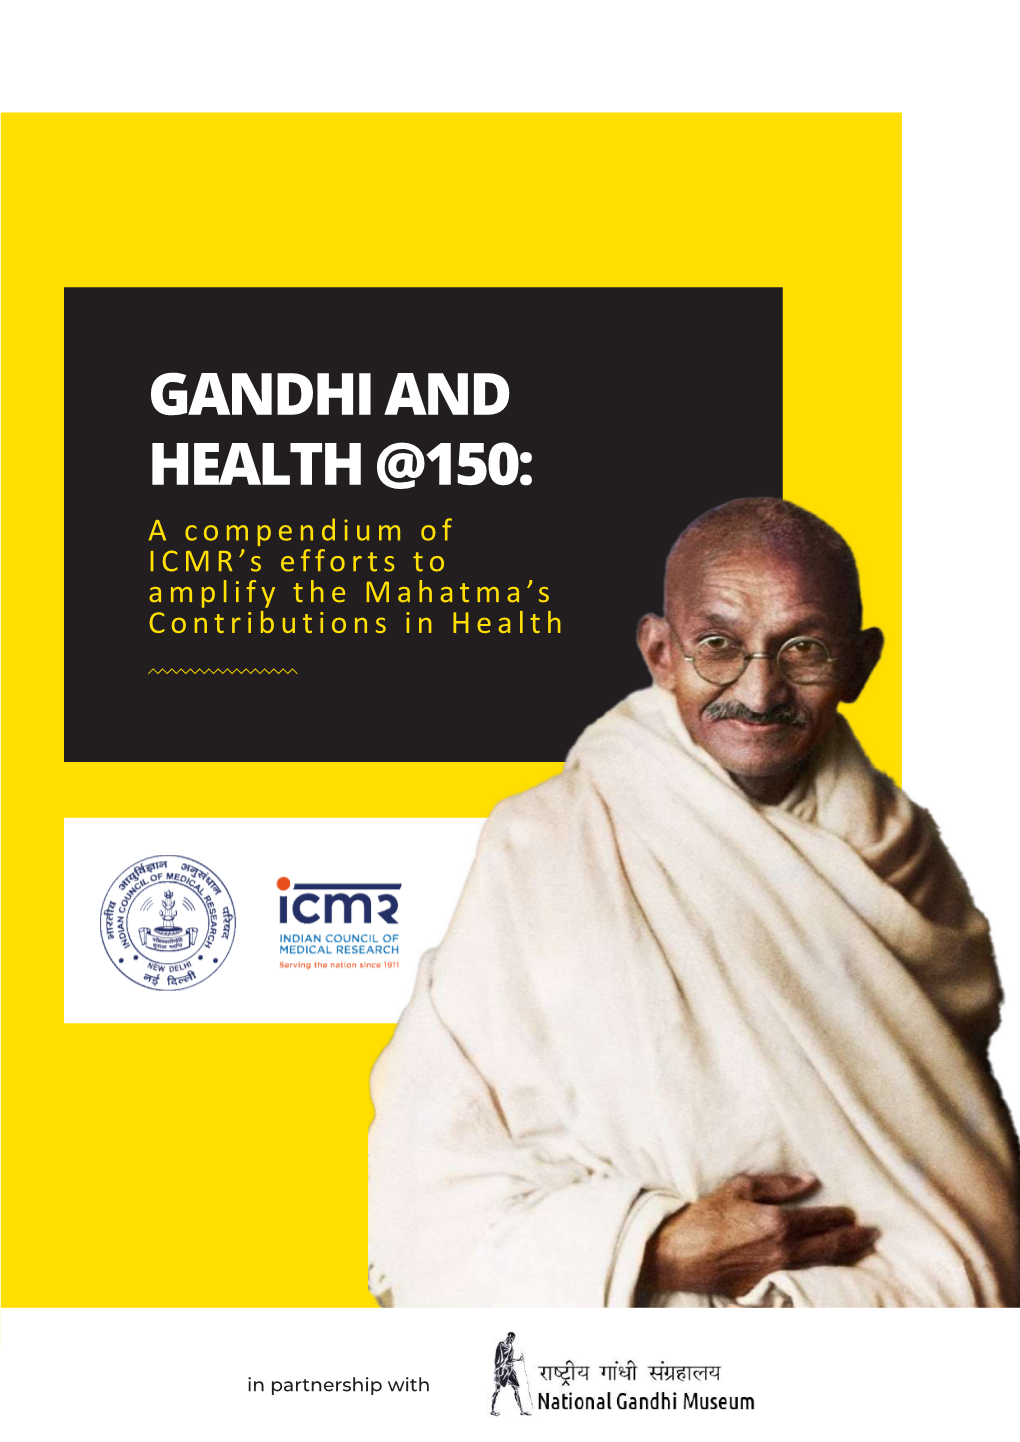 GANDHI and HEALTH @150: a Compendium of ICMR’S Efforts to Amplify the Mahatma’S Contributions in Health